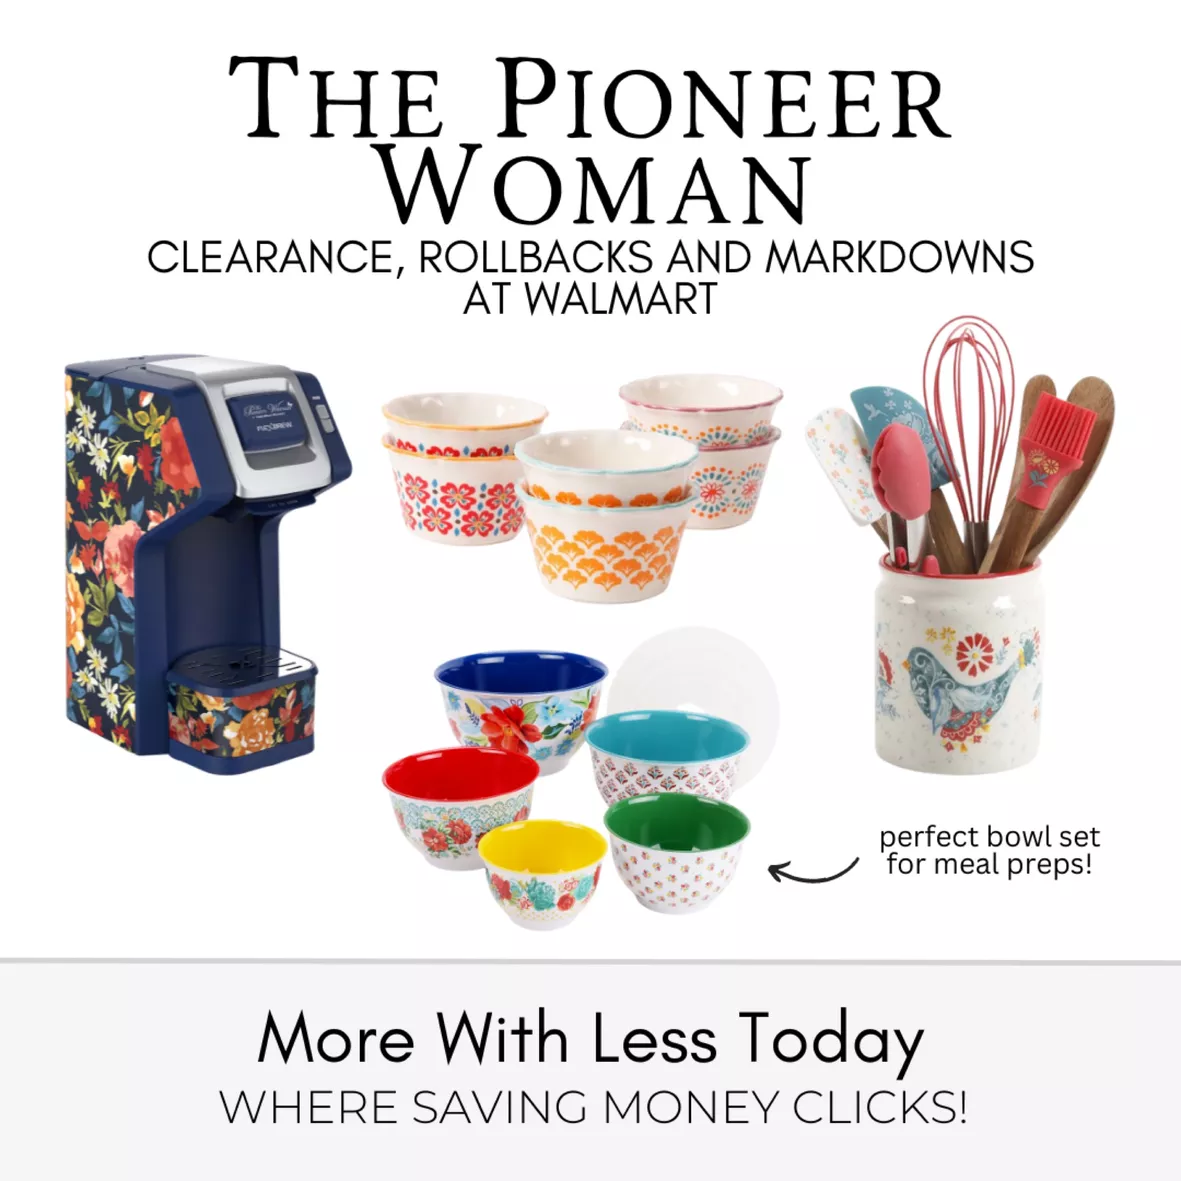 The Pioneer Woman Clearance, Rollbacks and Markdowns